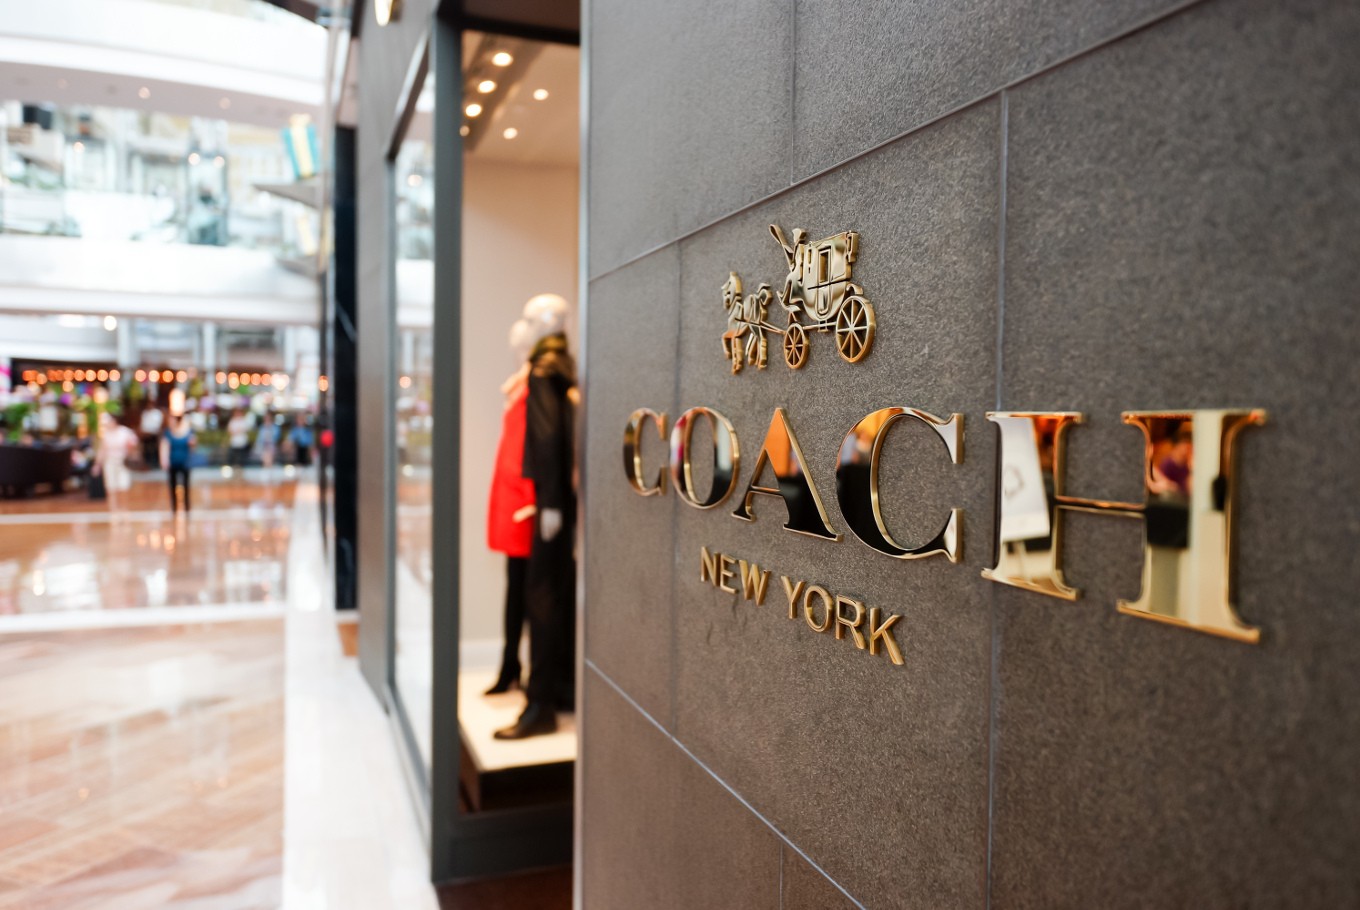 Coach, Inc. to Change Its Name to Tapestry, Inc.